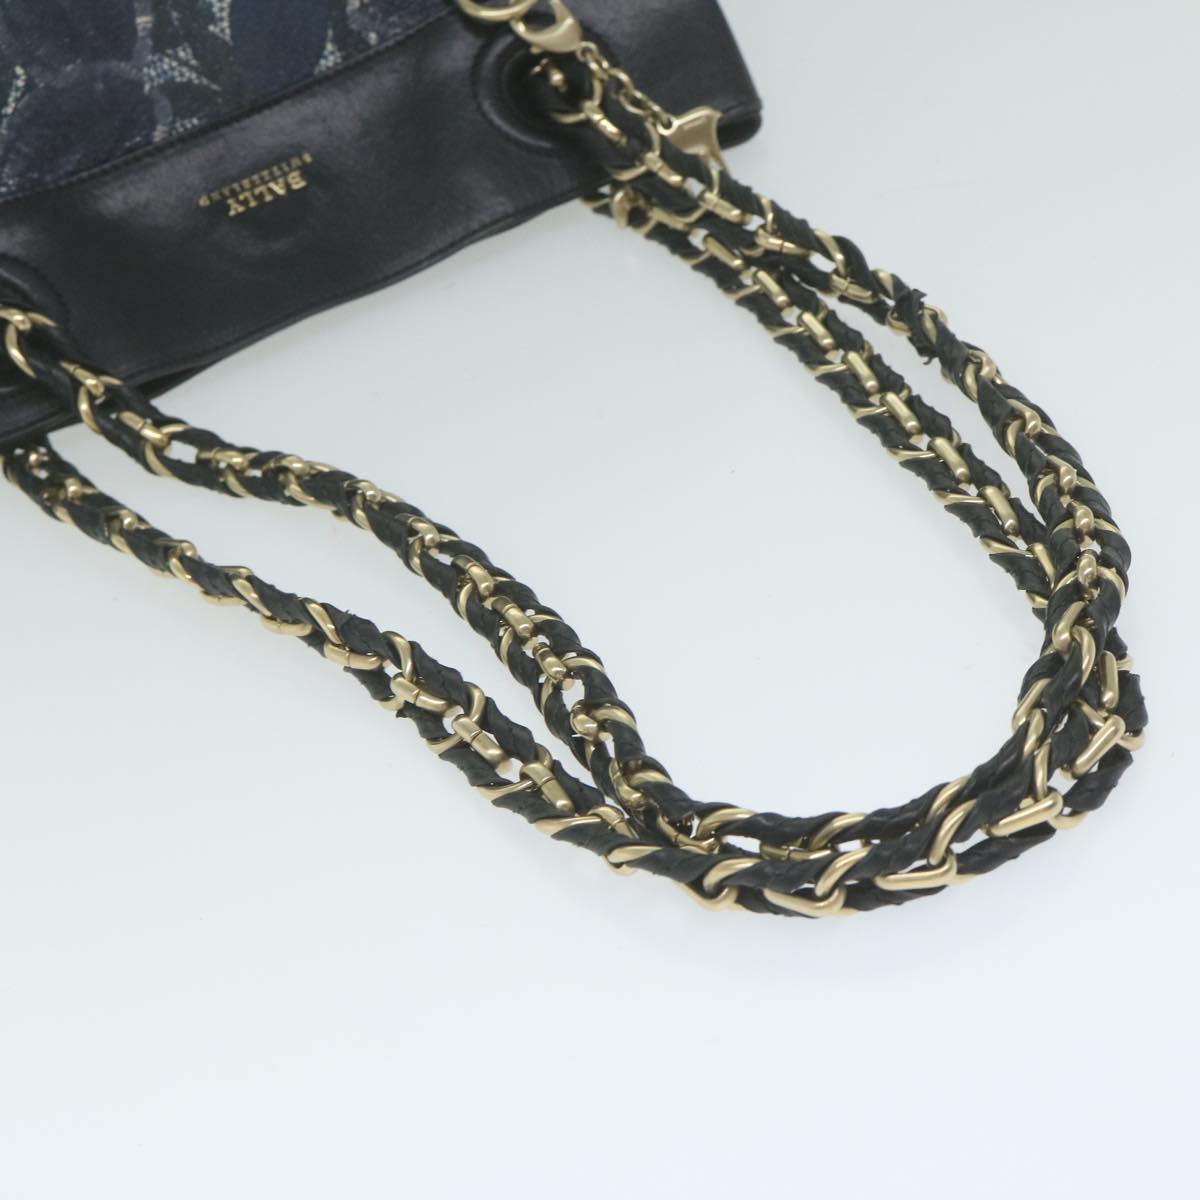 BALLY Chain Shoulder Bag Leather Navy Auth ac2586